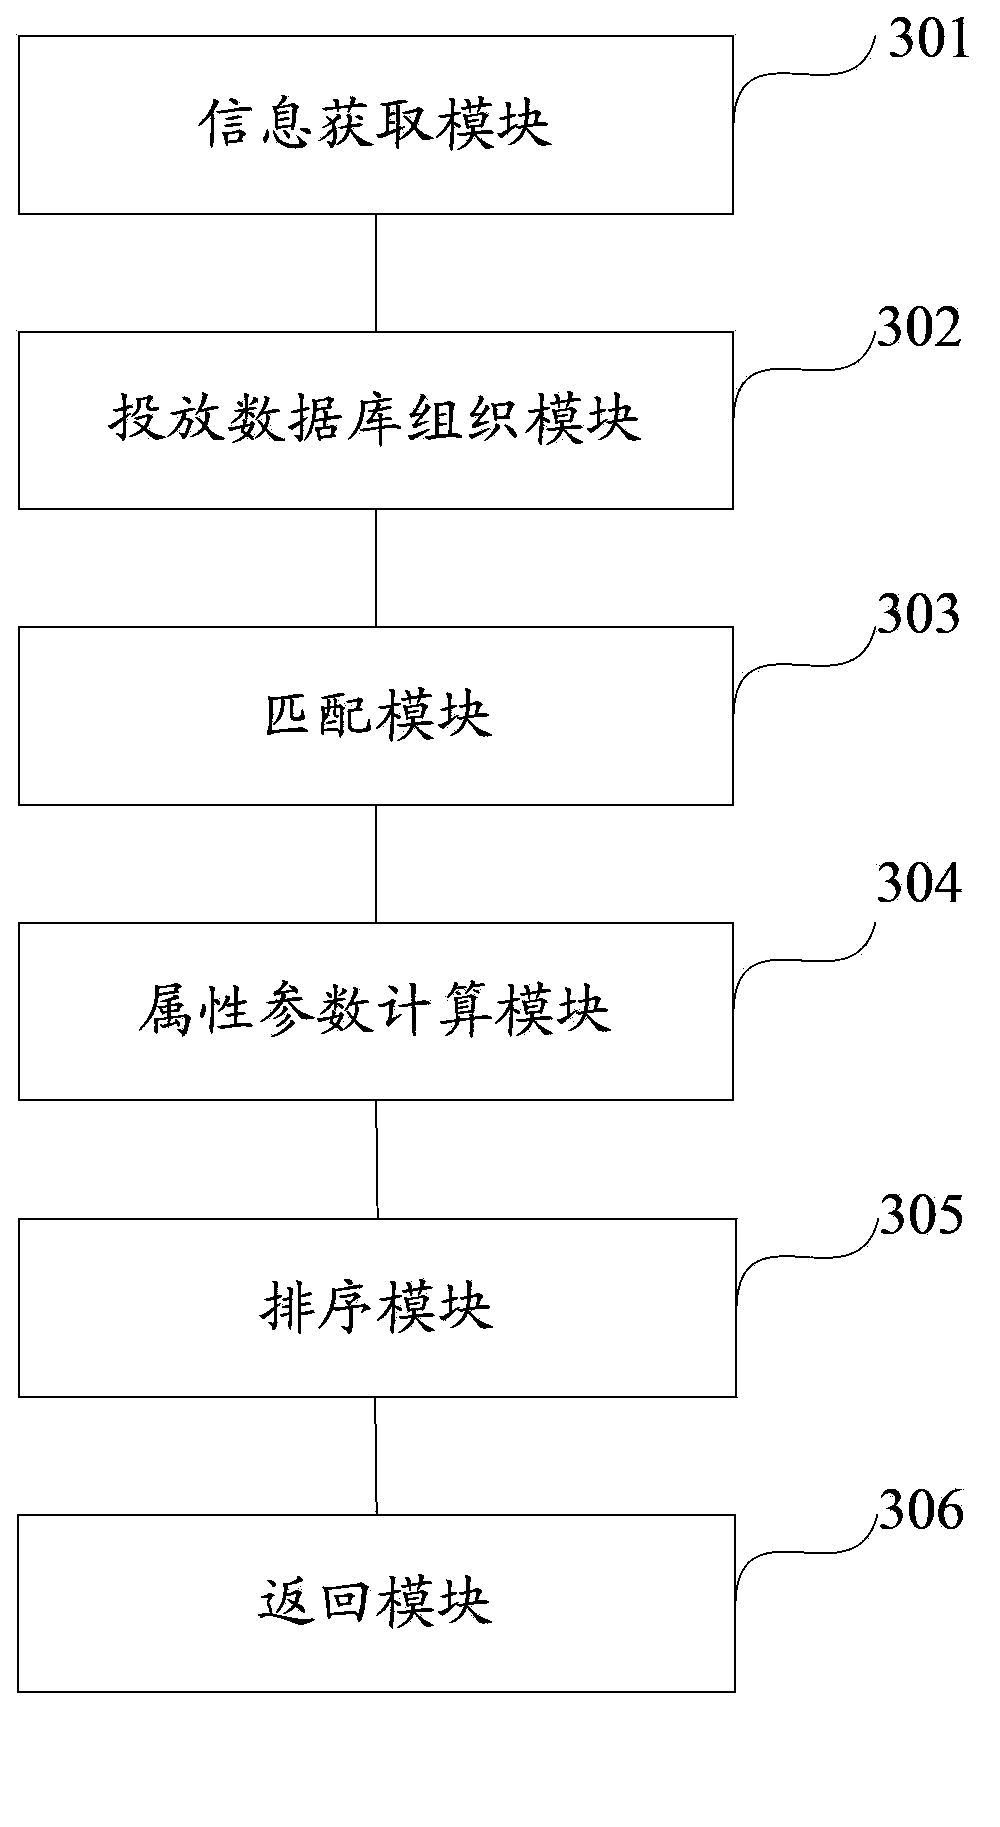 Method and device for searching for released information